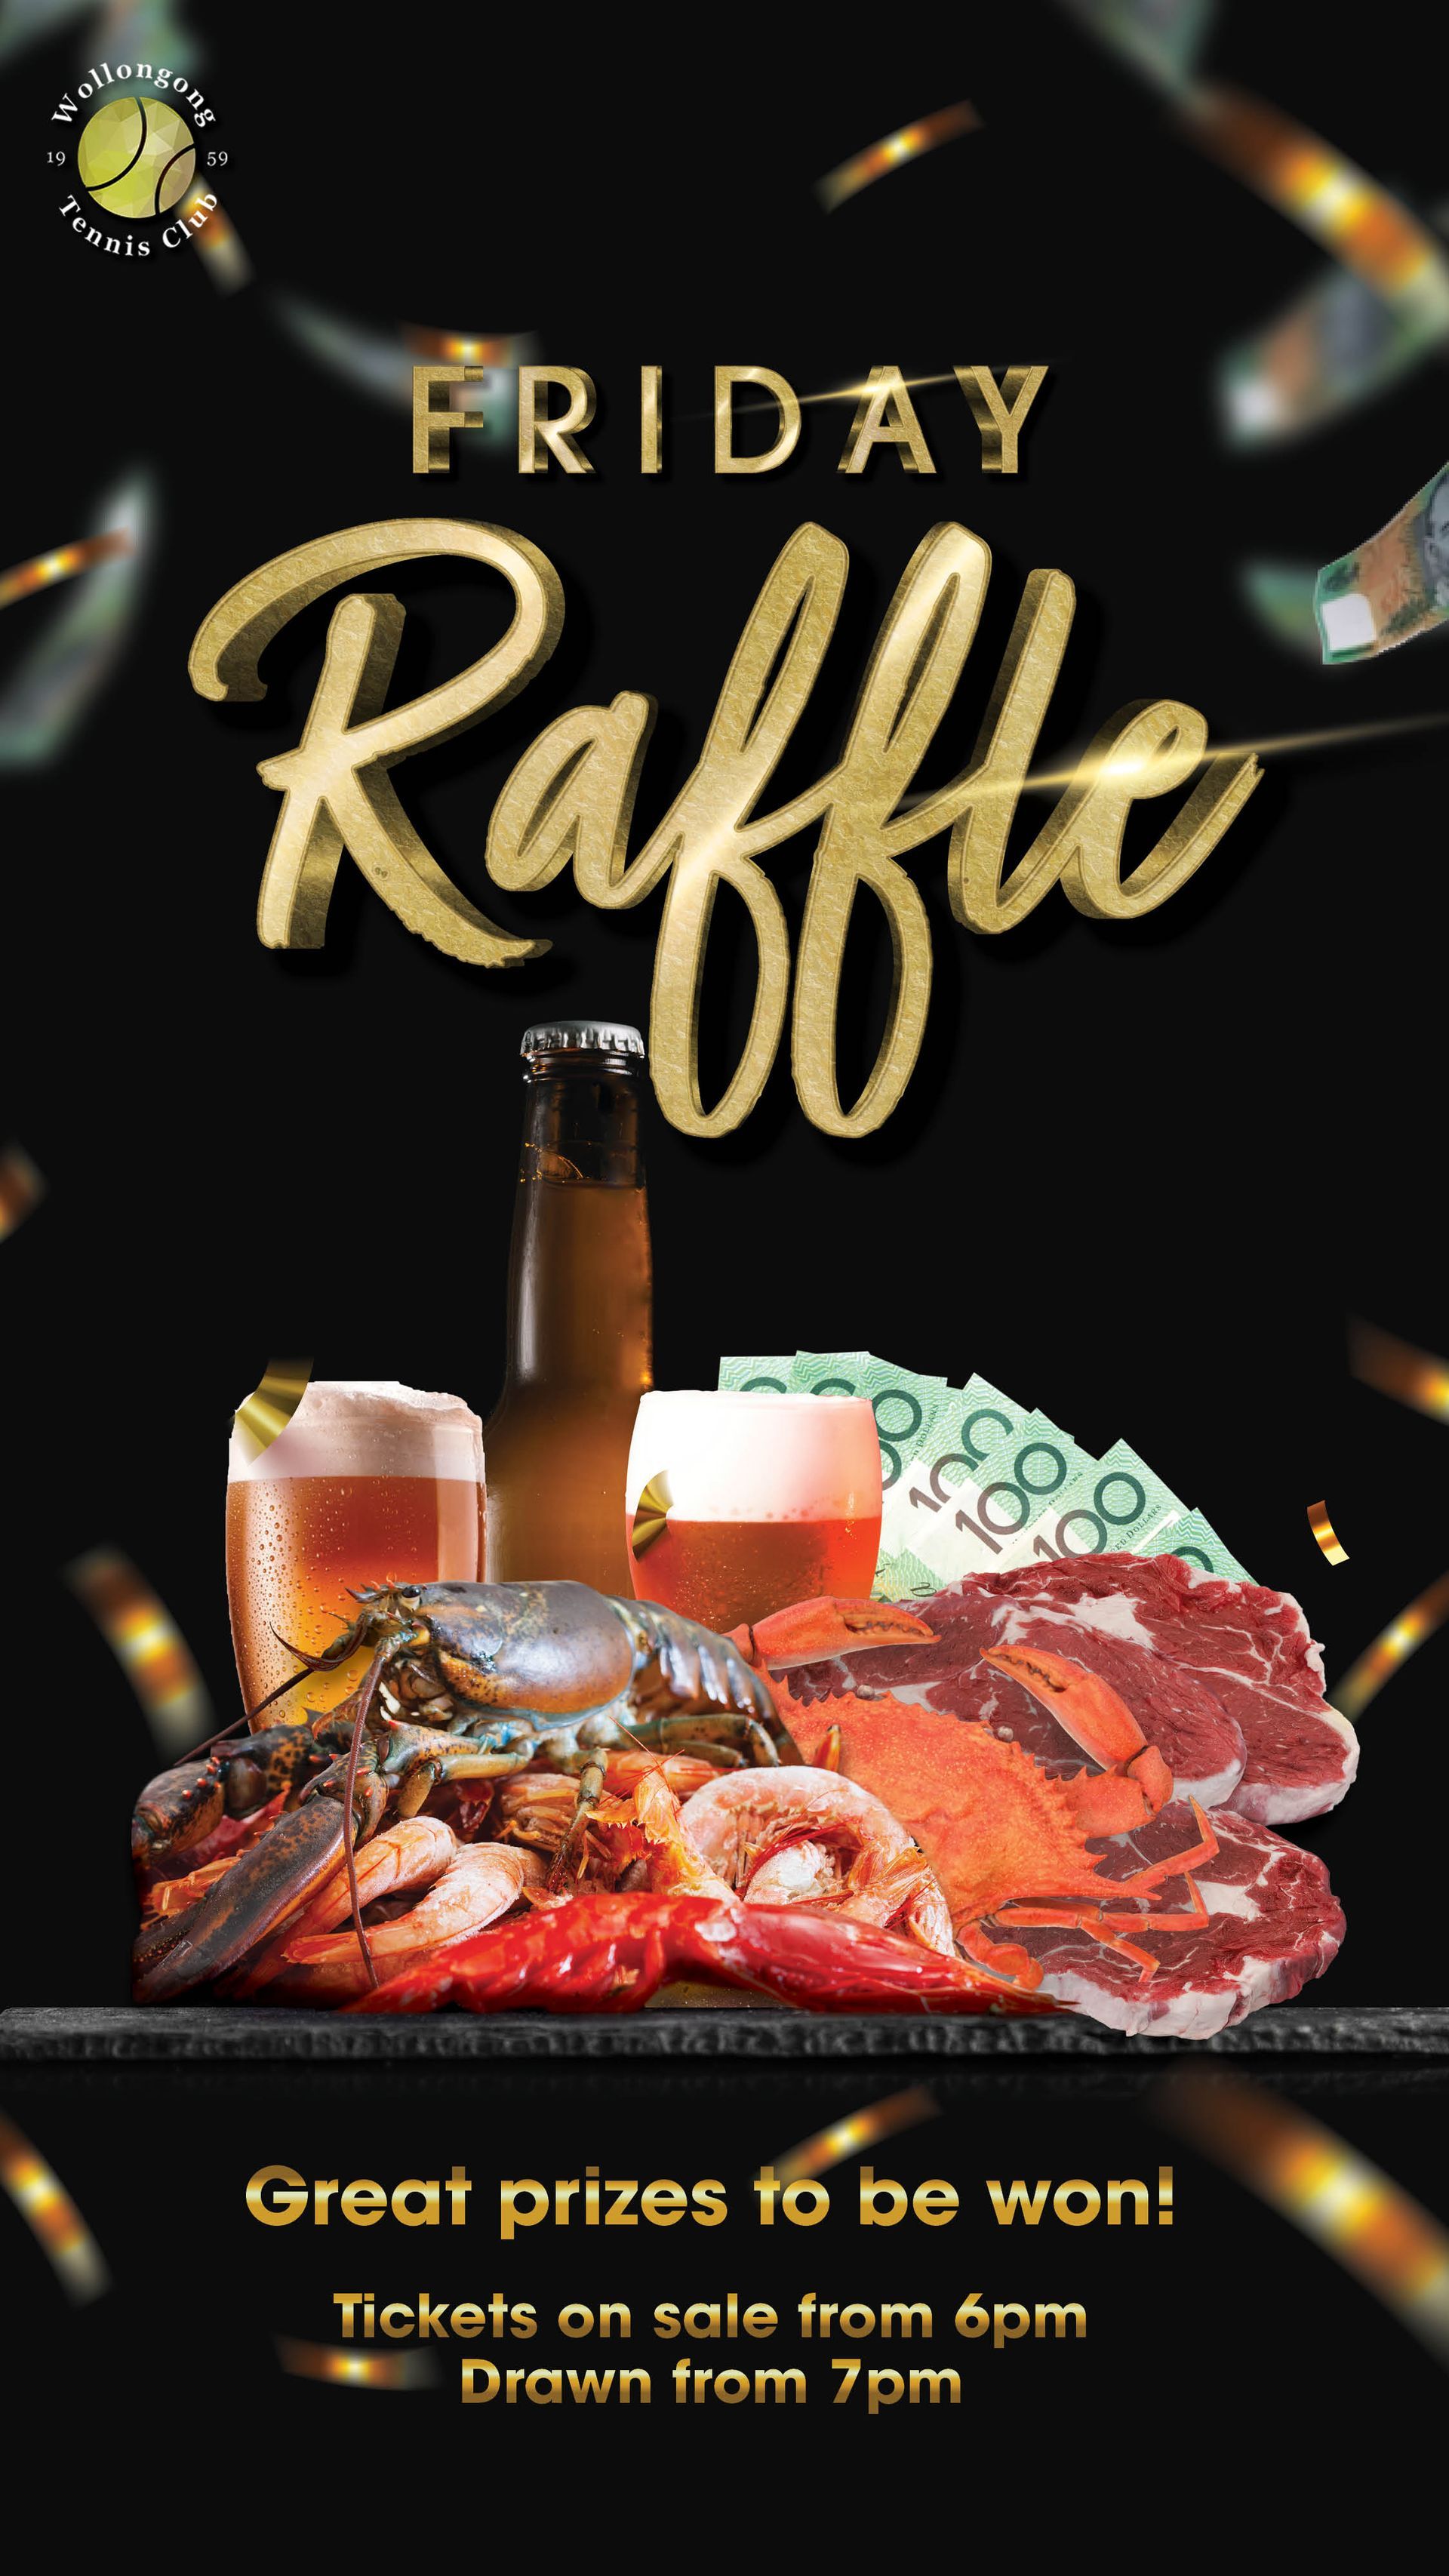 Friday Meat Raffle – Events in Wollongong